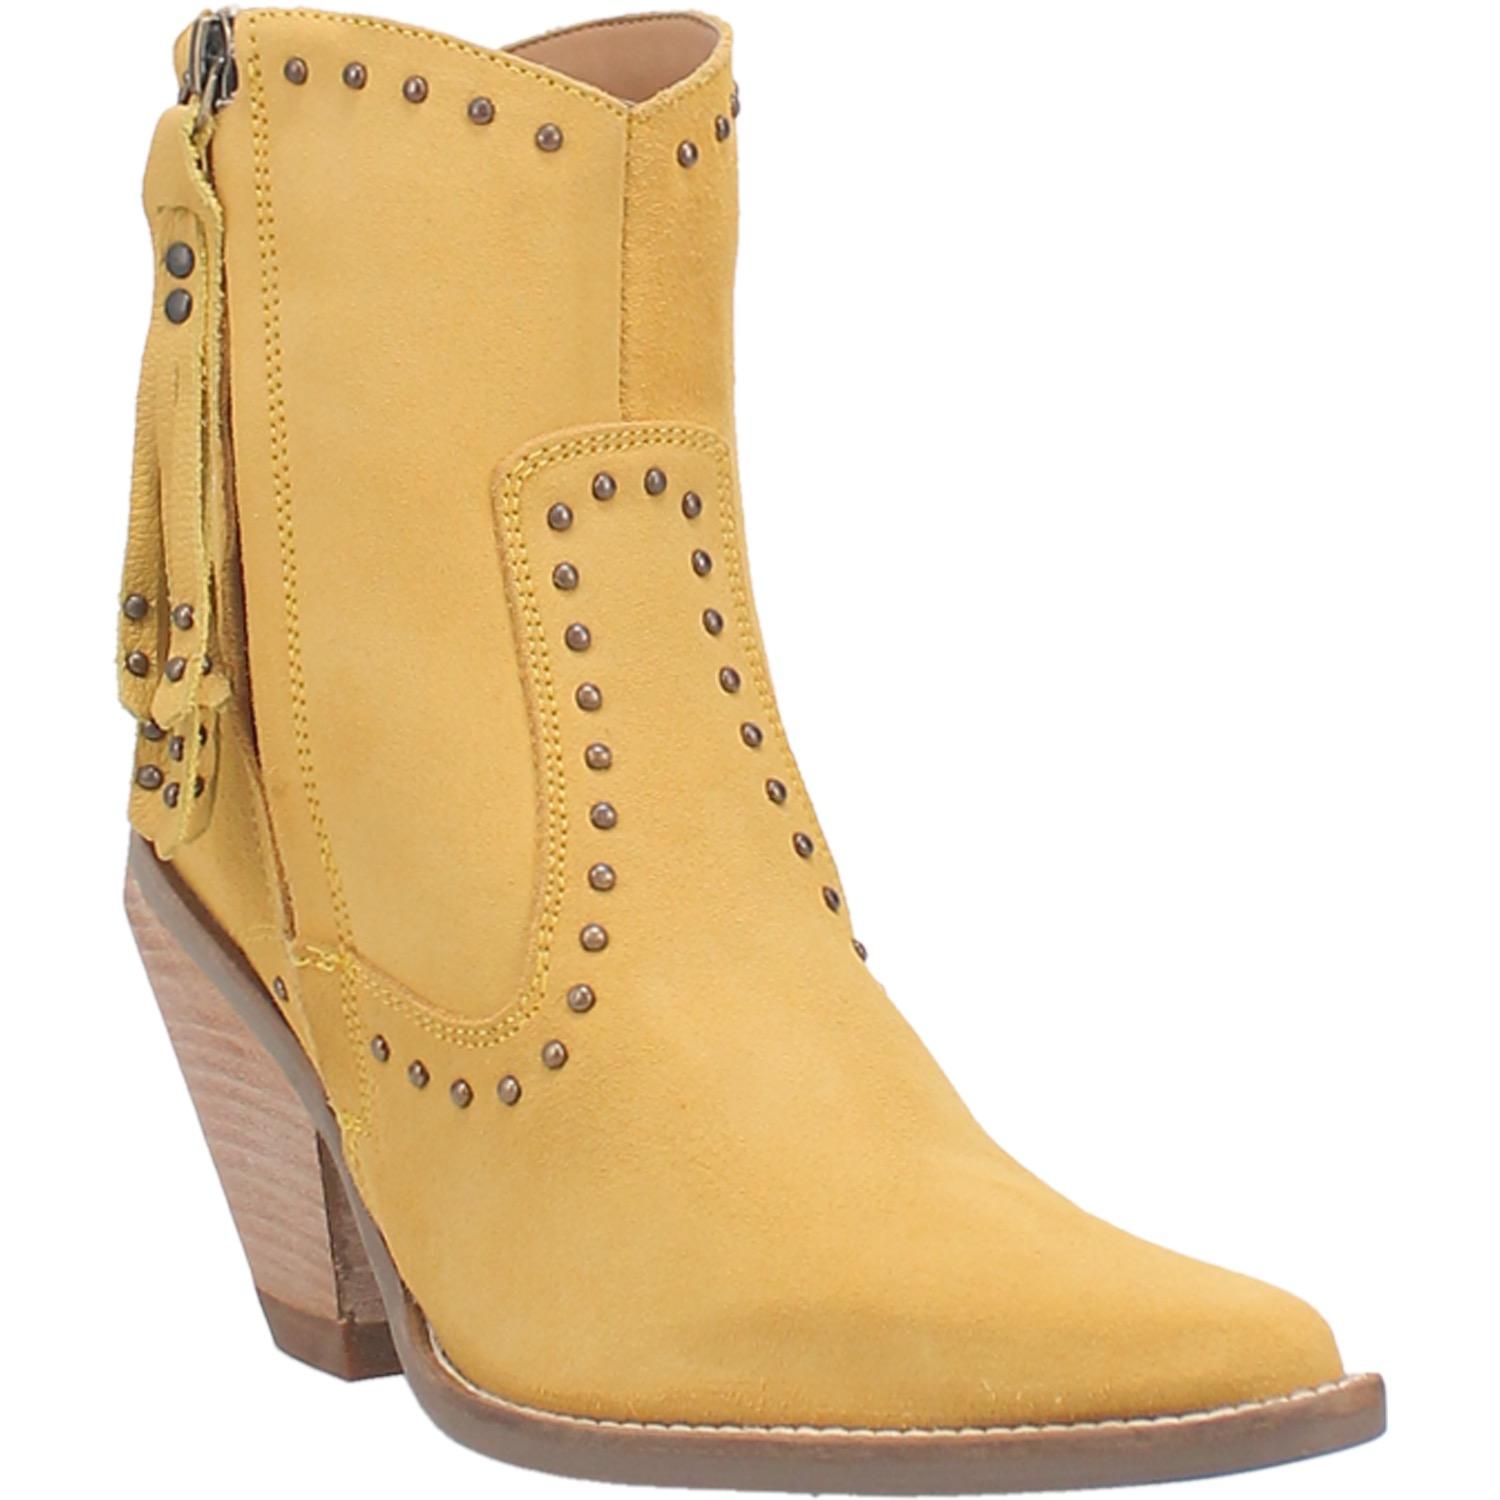 The boots shown are a low calf height bootie with a snip pointed toe made of genuine leather. The stud design and detail adds an additional edge to any outfit you pair them with. This pair is yellow suede. 